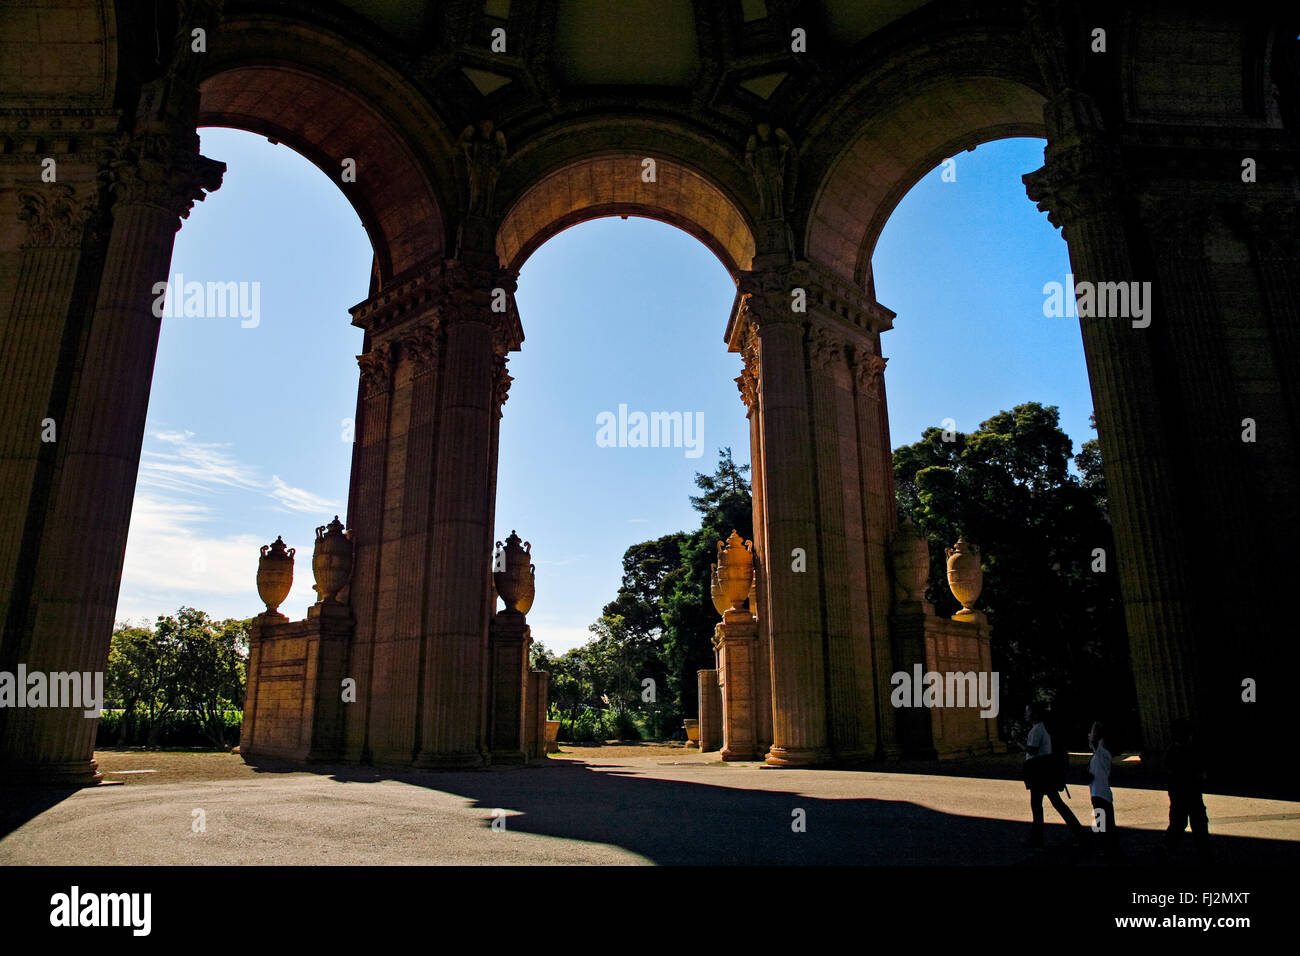 Visitors enjoy the Roman style columns which adorn the PALACE OF FINE ARTS THEATRE - SAN FRANCISCO, CALIFORNIA Stock Photo